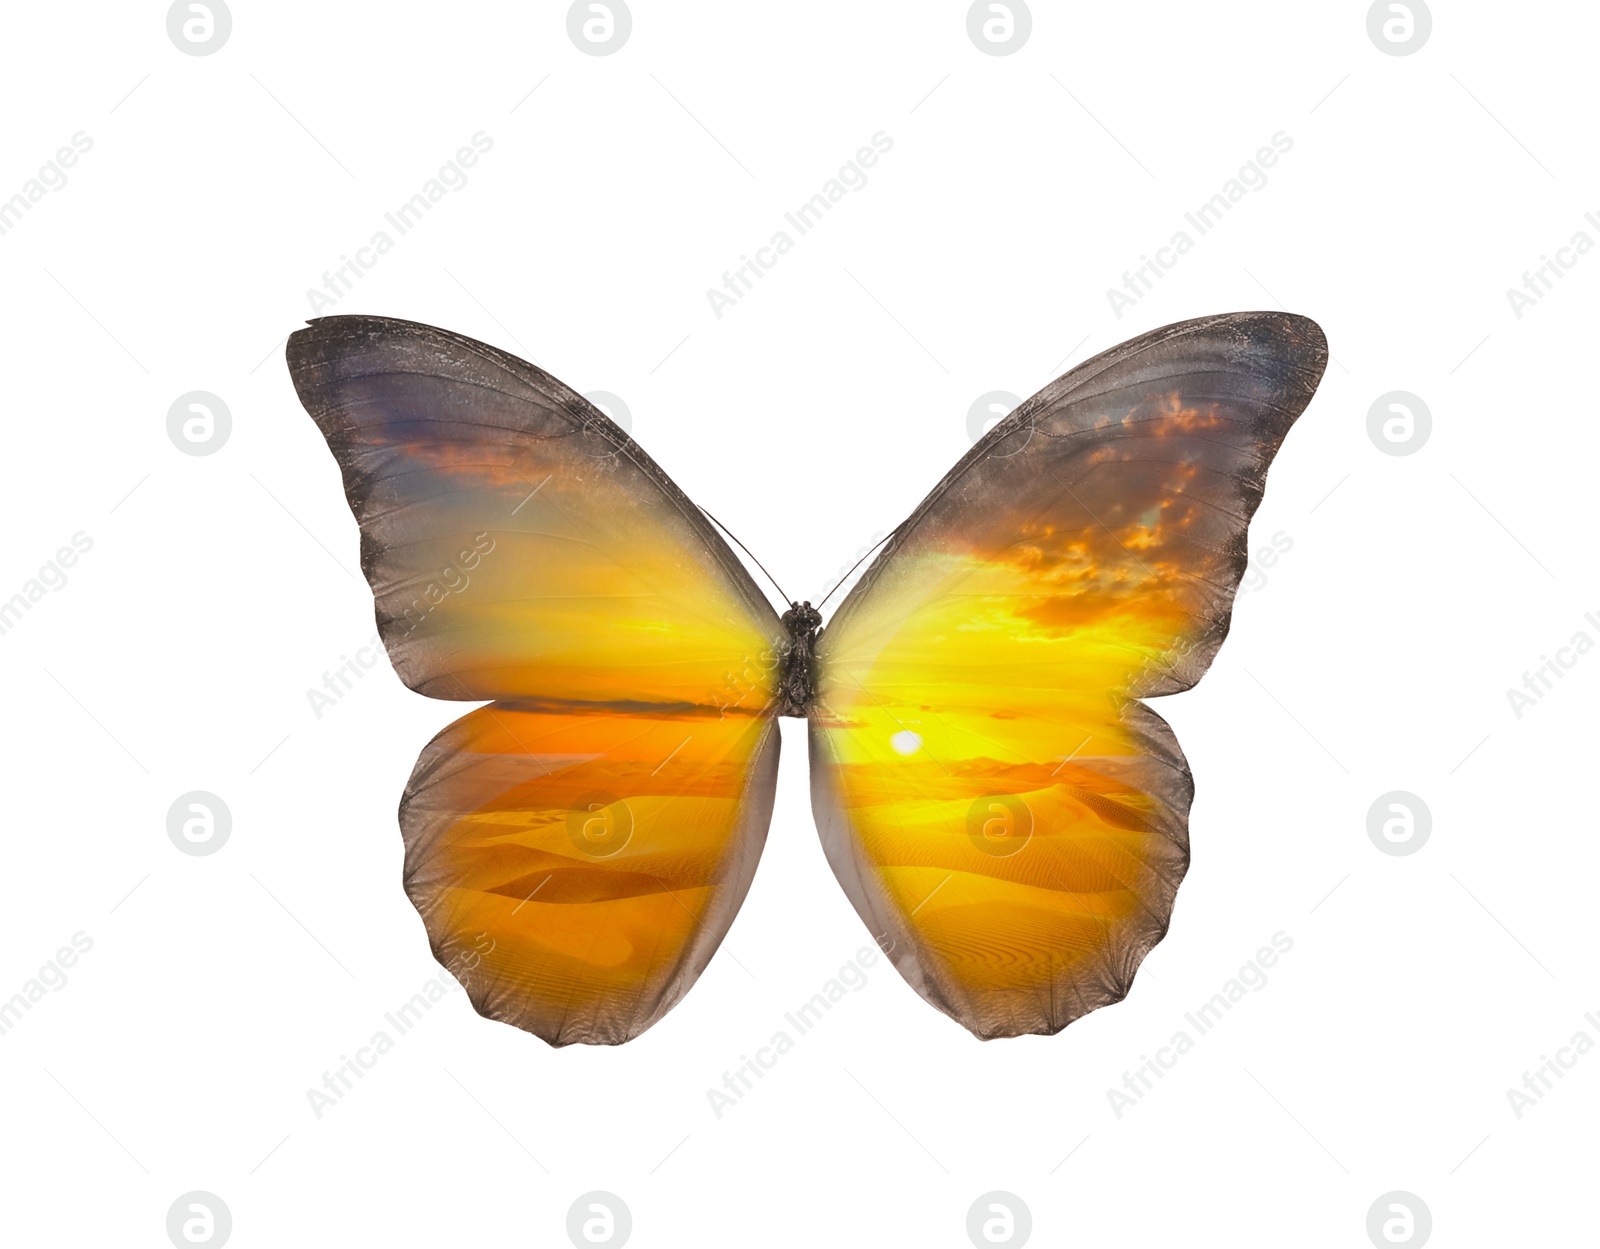 Image of Double exposure of fragile exotic butterfly and sandy desert